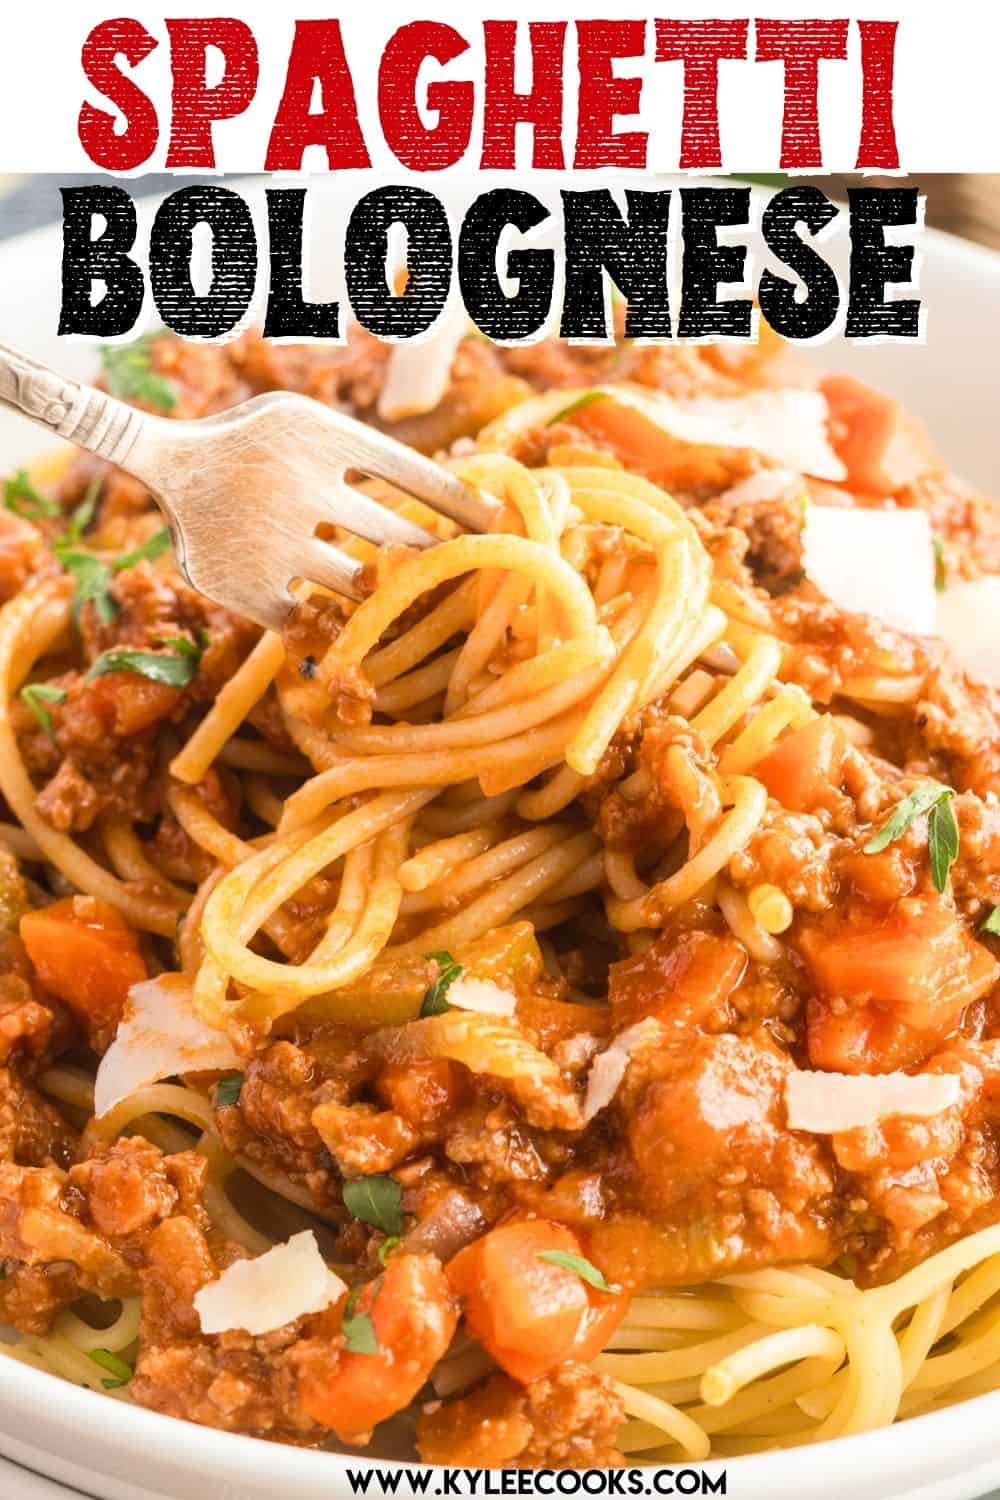 Spaghetti Bolognese with recipe title overlaid in text